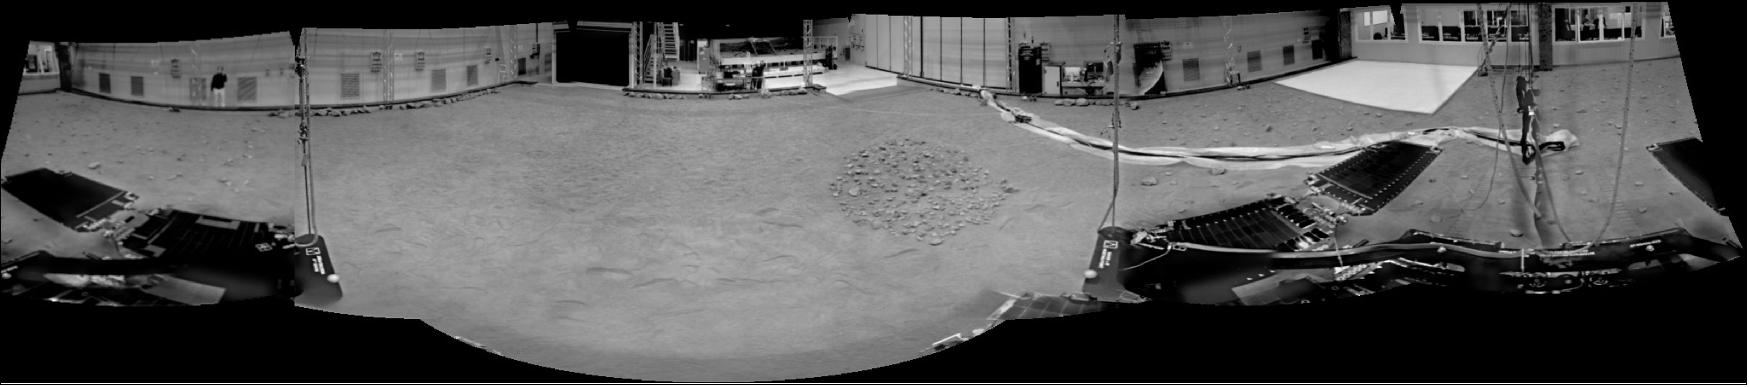 Figure 30: The replica ExoMars rover – the GTM (Ground Test Model) – that will be used in the Rover Operations Control Centre to support mission training and operations has completed its first drive around the Mars Terrain Simulator. As part of the exercise, the GTM’s black-and-white navigation cameras (NavCam) took a series of images to create this panoramic view (image credit: ESA/ExoMars/NavCam)